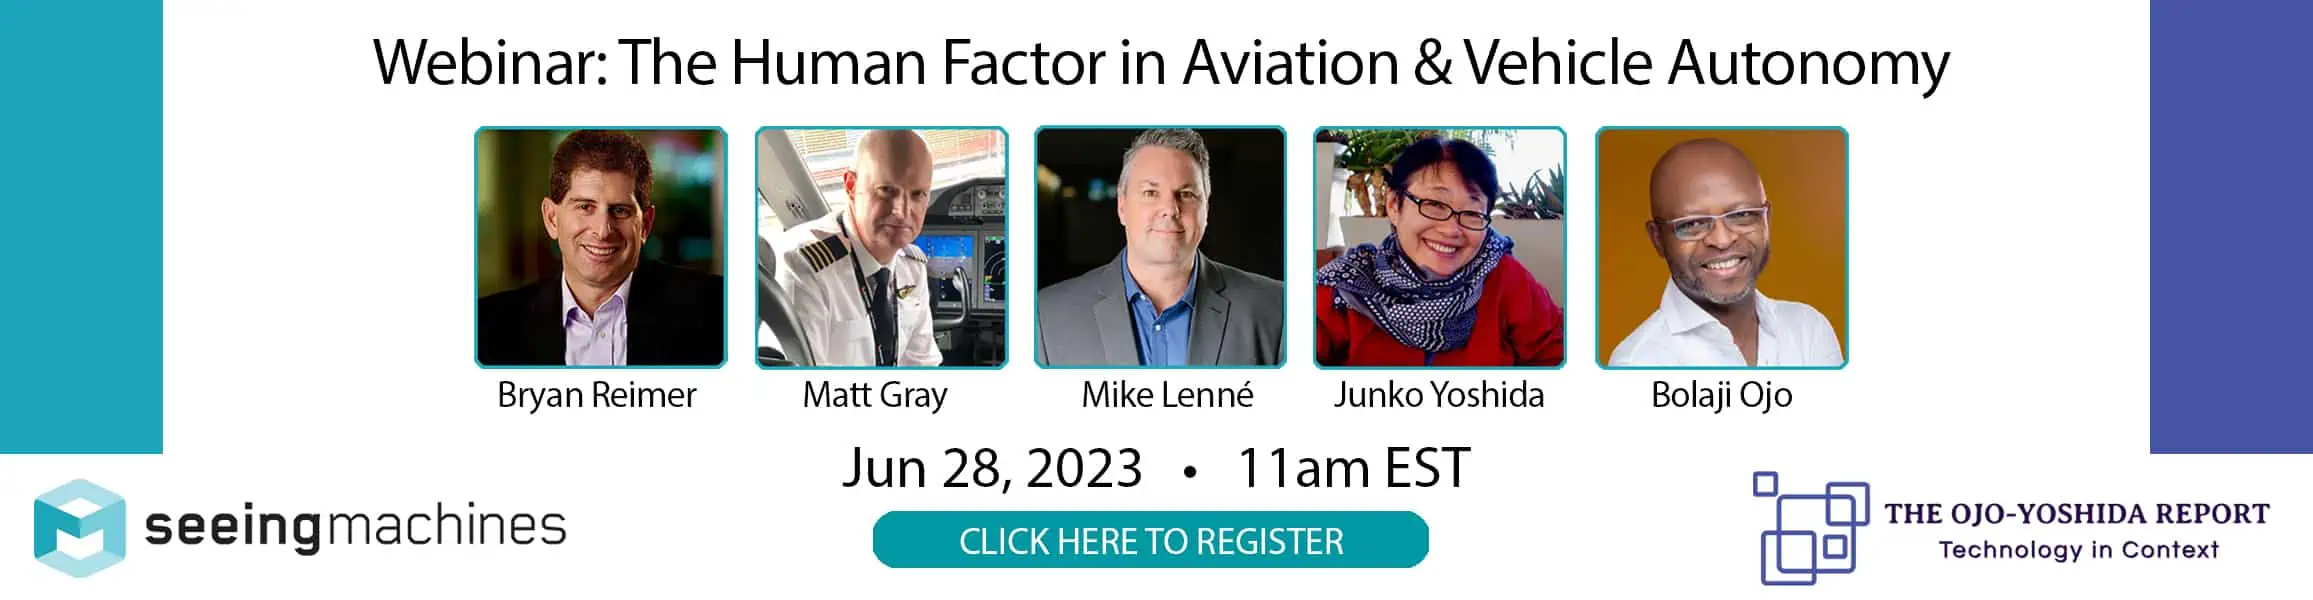 The Human Factor in Aviation & Vehicle Autonomy